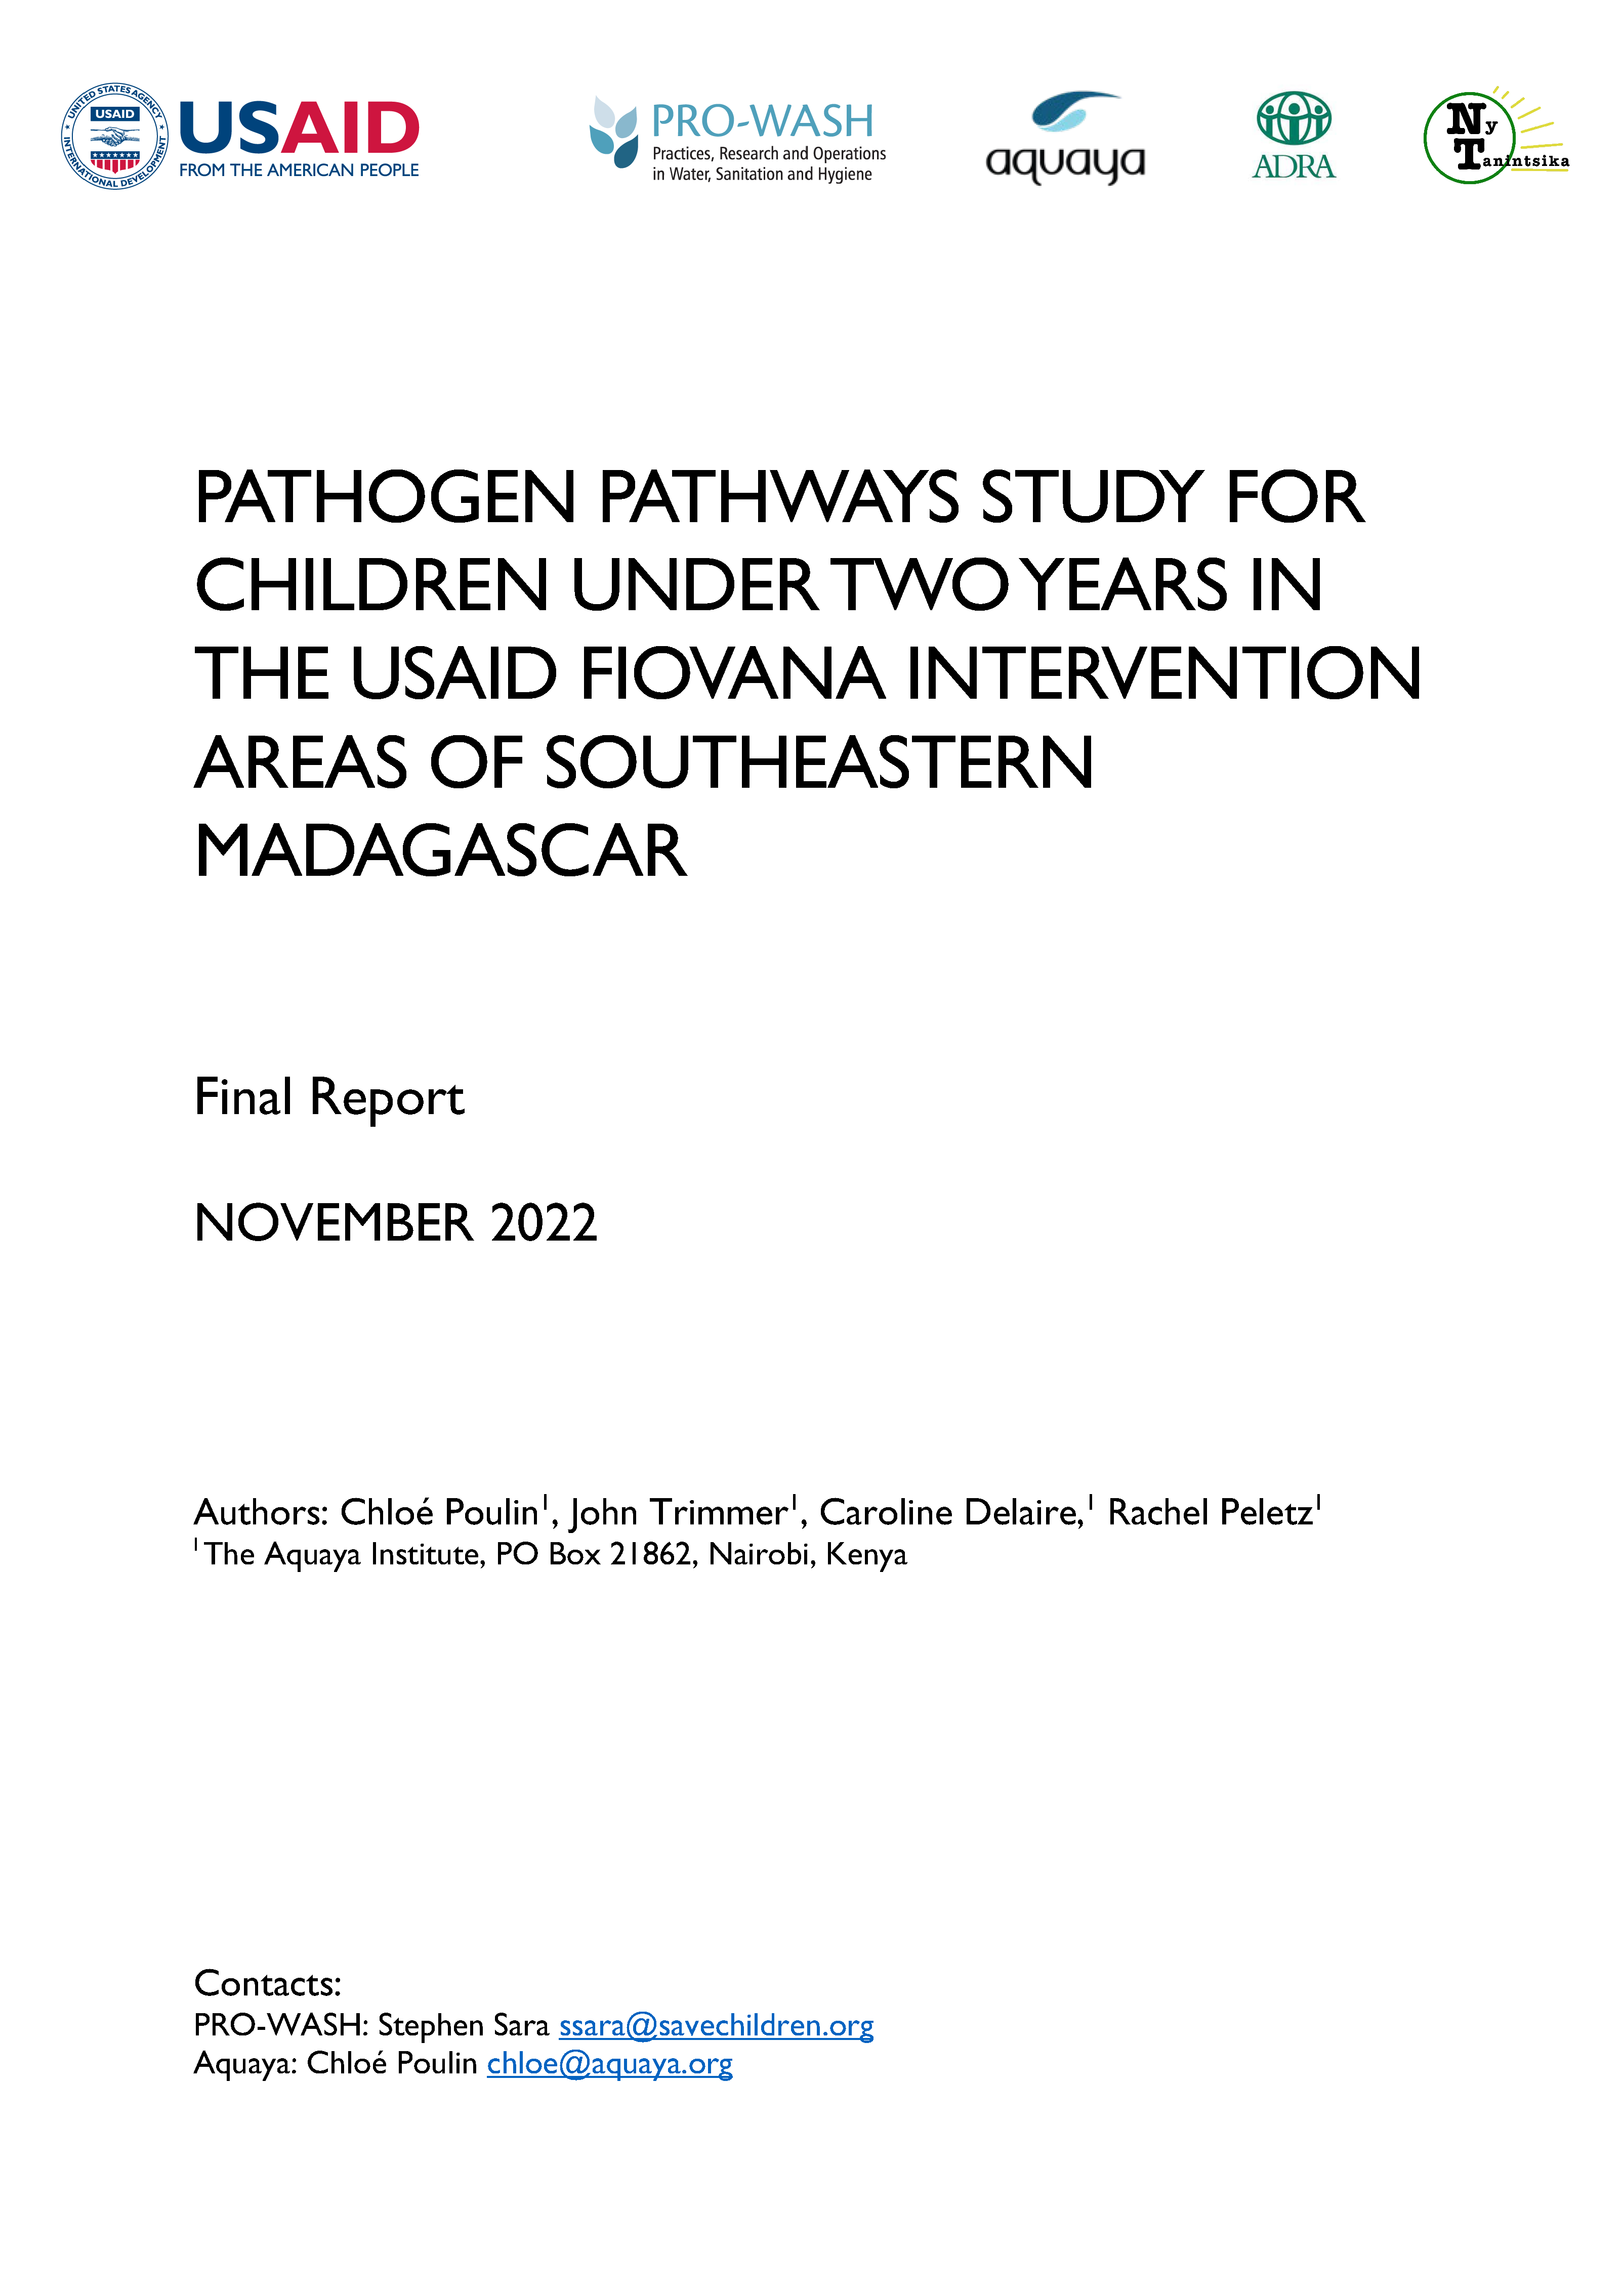 Cover page for Pathogen Pathways Study for Children Under Two Years in the USAID FIOVANA Intervention Areas of Southeastern Madagascar